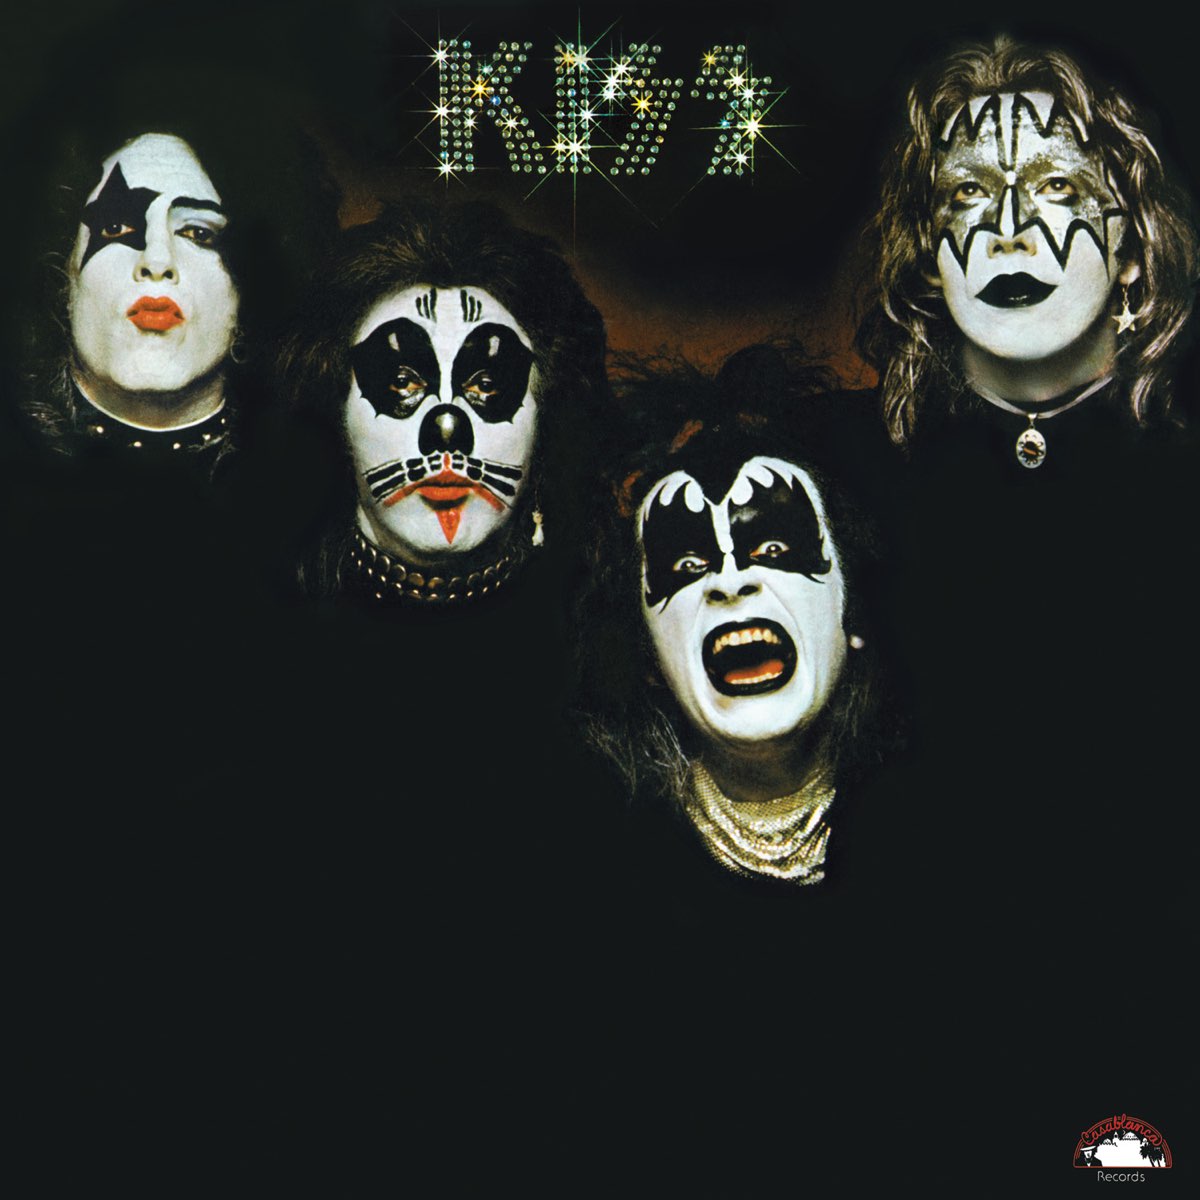 WOW! 50 years ago, we released our self-titled debut album. #KISSTORY When & where did you first get this album?